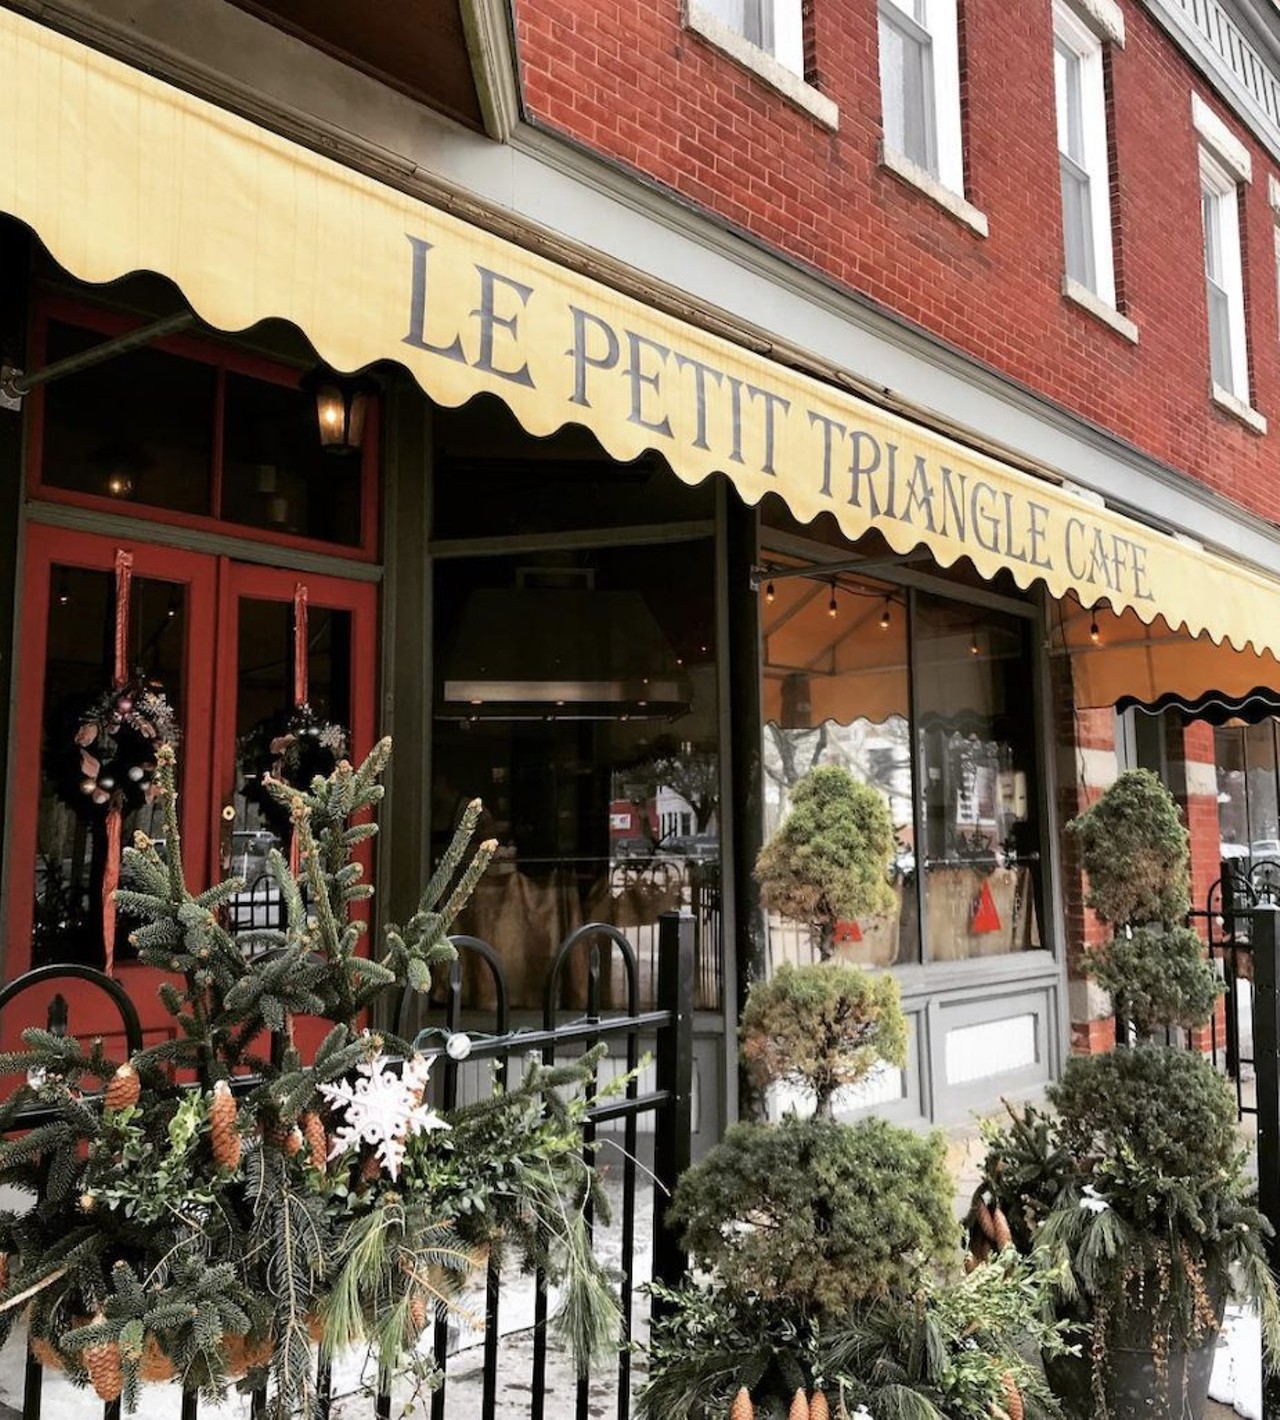  Le Petit Triangle
1881 Fulton Ave., Cleveland 
A little cramped, occasionally noisy, and quite possibly the city's smallest restaurant, this tiny French bistro still manages to provide a romantic atmosphere while turning out superlative crepes, earthy p&acirc;t&eacute;s, and one of the best Croque Monsieur sandwiches this side of the Seine. You&#146;ll be transported to Paris for a couple hours here.
Photo via @Lindsey_Salchi/Instagram